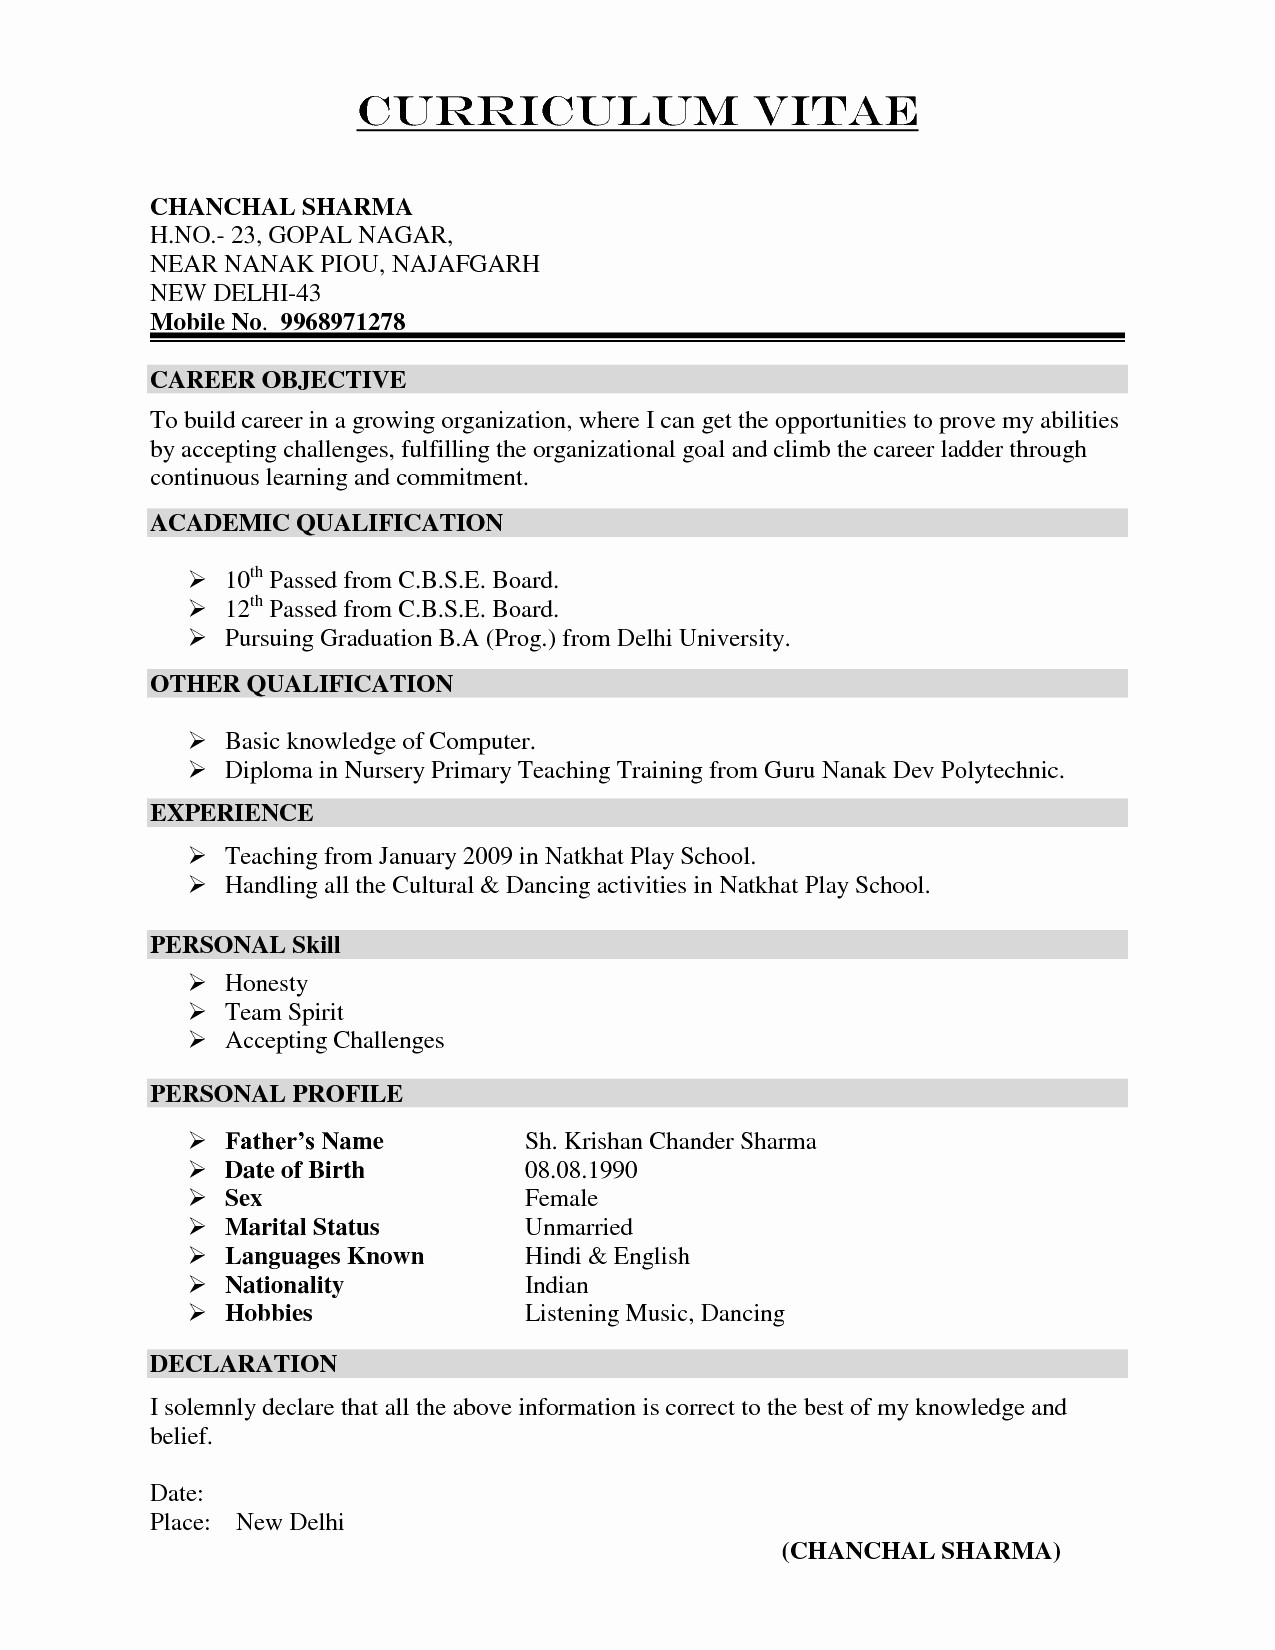 Job Cover Letter Template - Template Cover Letter New New Resume Cover Letter formatted Resume